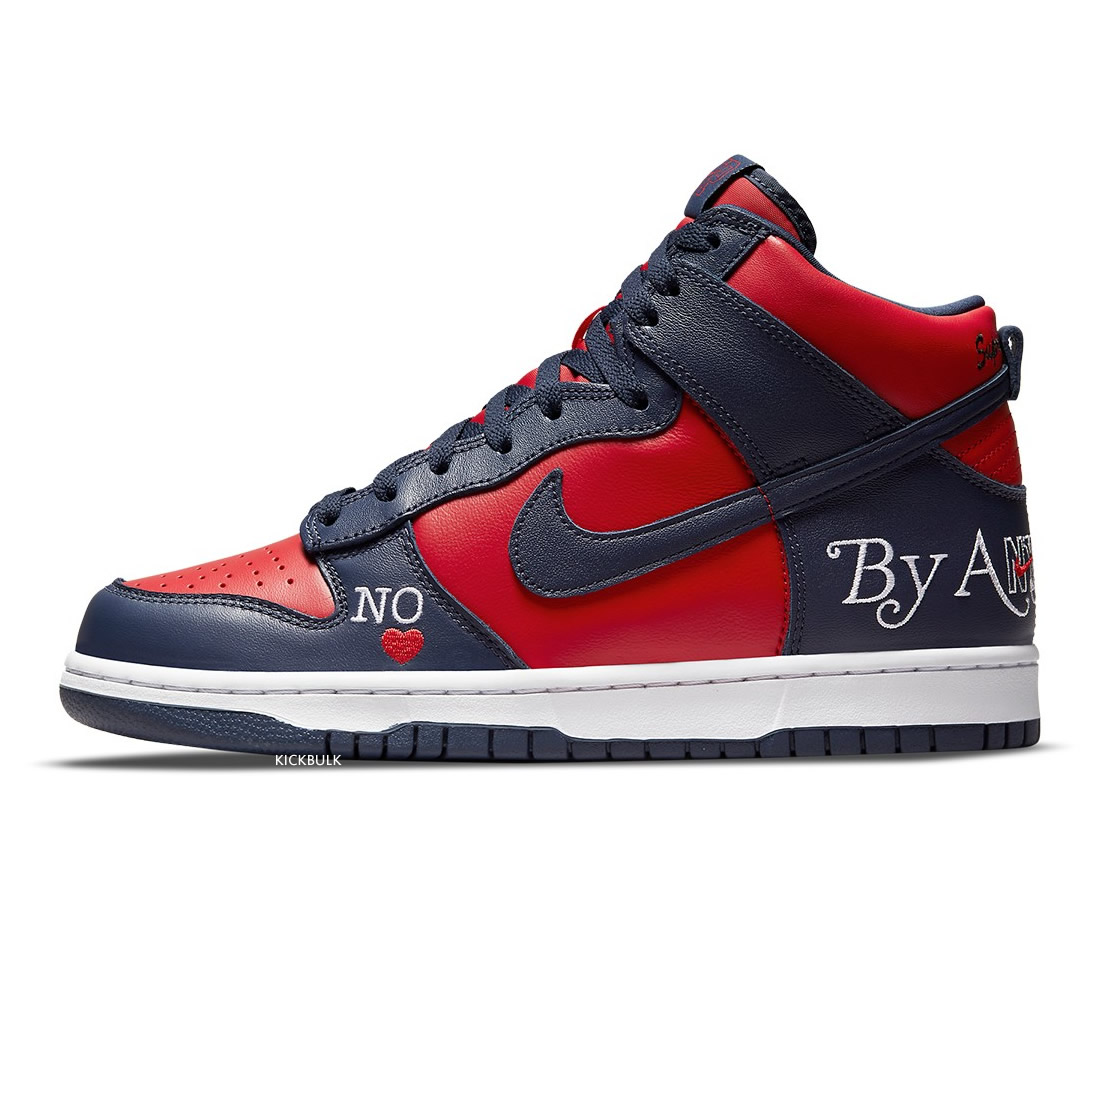 Supreme Nike Dunk High Sb By Any Means Red Navy Dn3741 600 1 - www.kickbulk.org